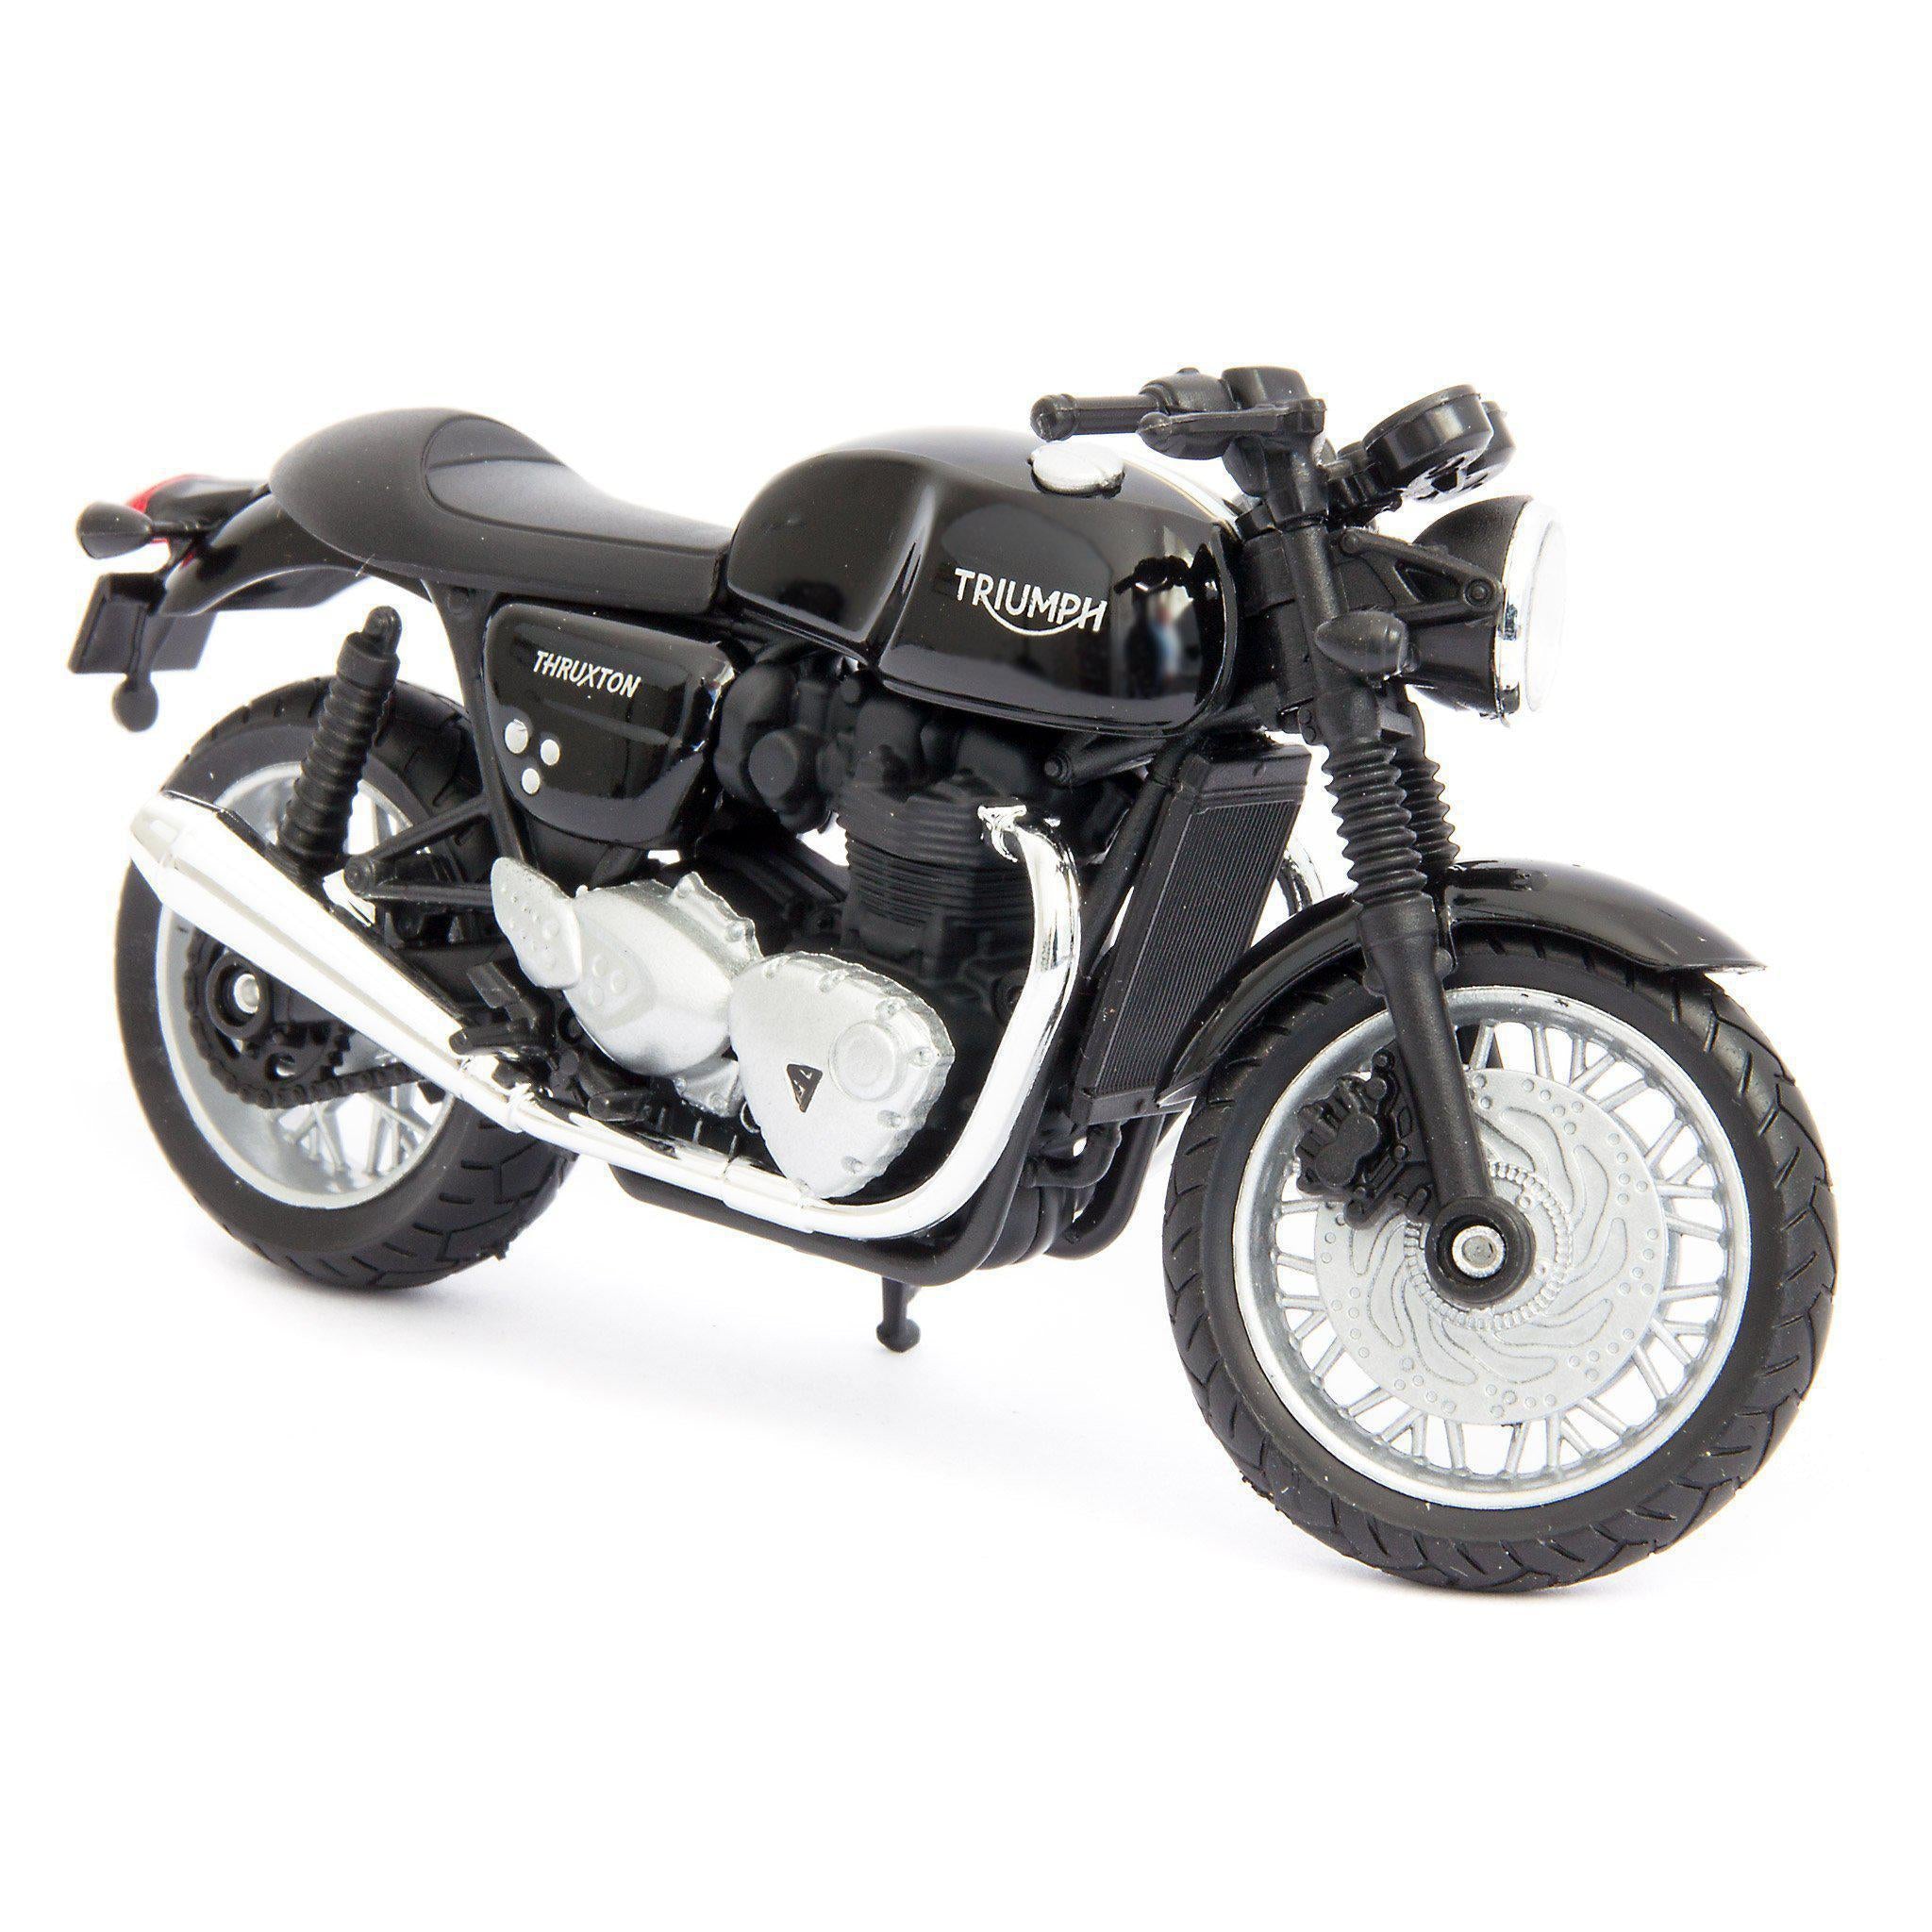 Triumph Thruxton 1200 Diecast Model Motorcycle - 1:18 Scale-Welly-Diecast Model Centre